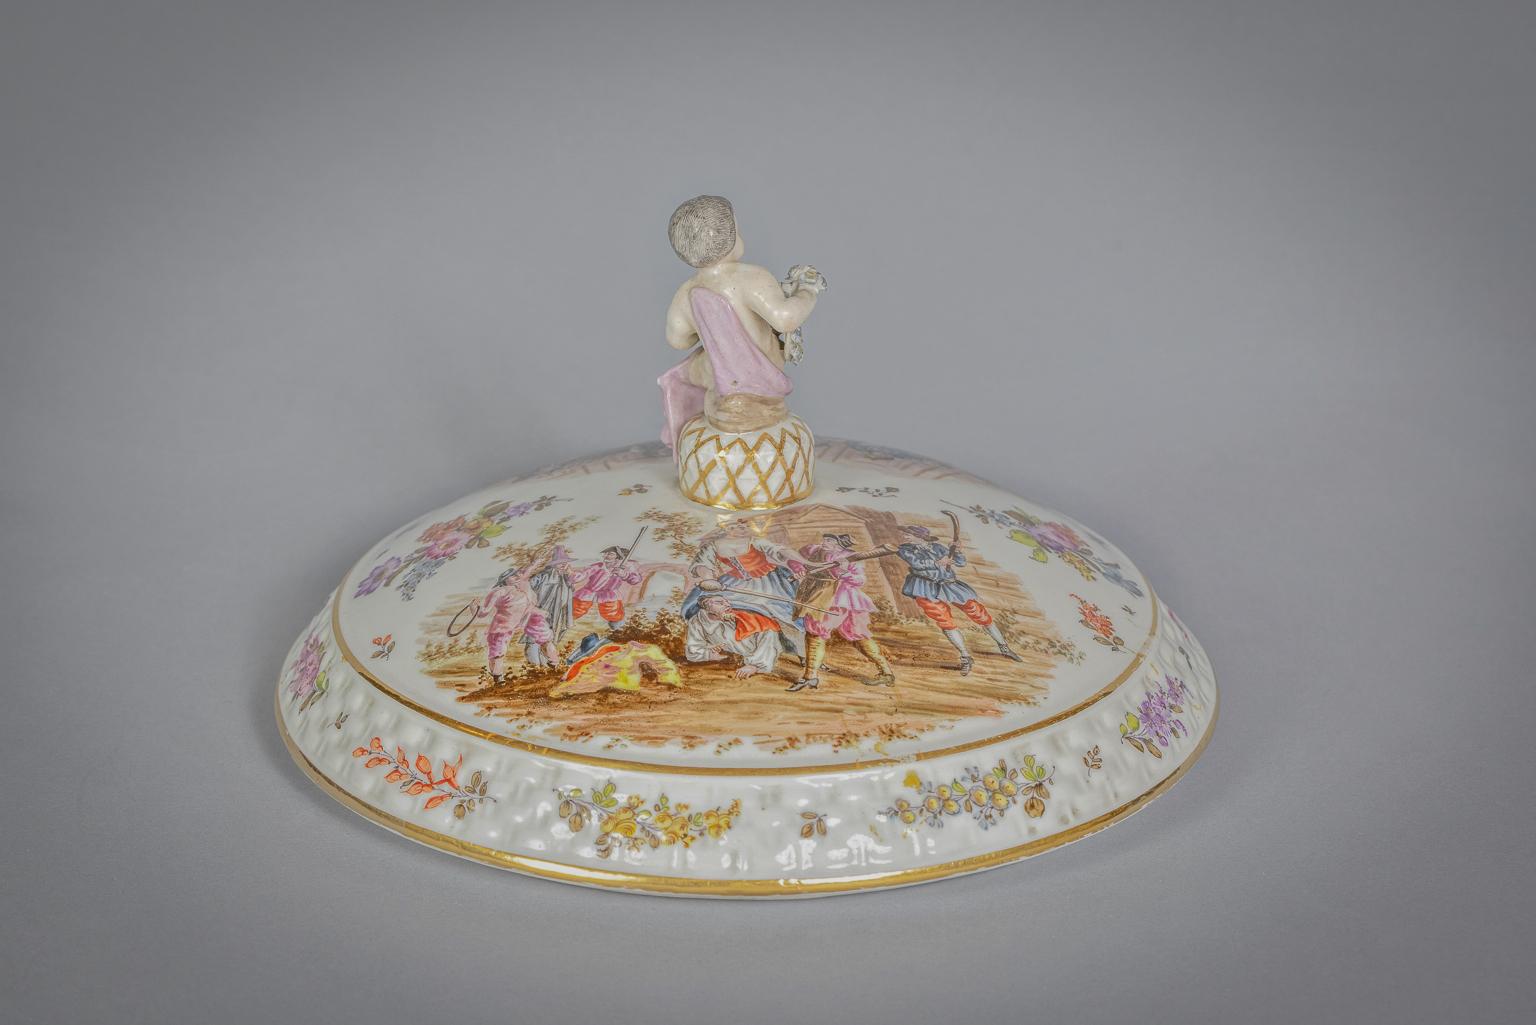 Bronze Mounted Berlin Porcelain Covered Centerpiece, circa 1875 For Sale 7